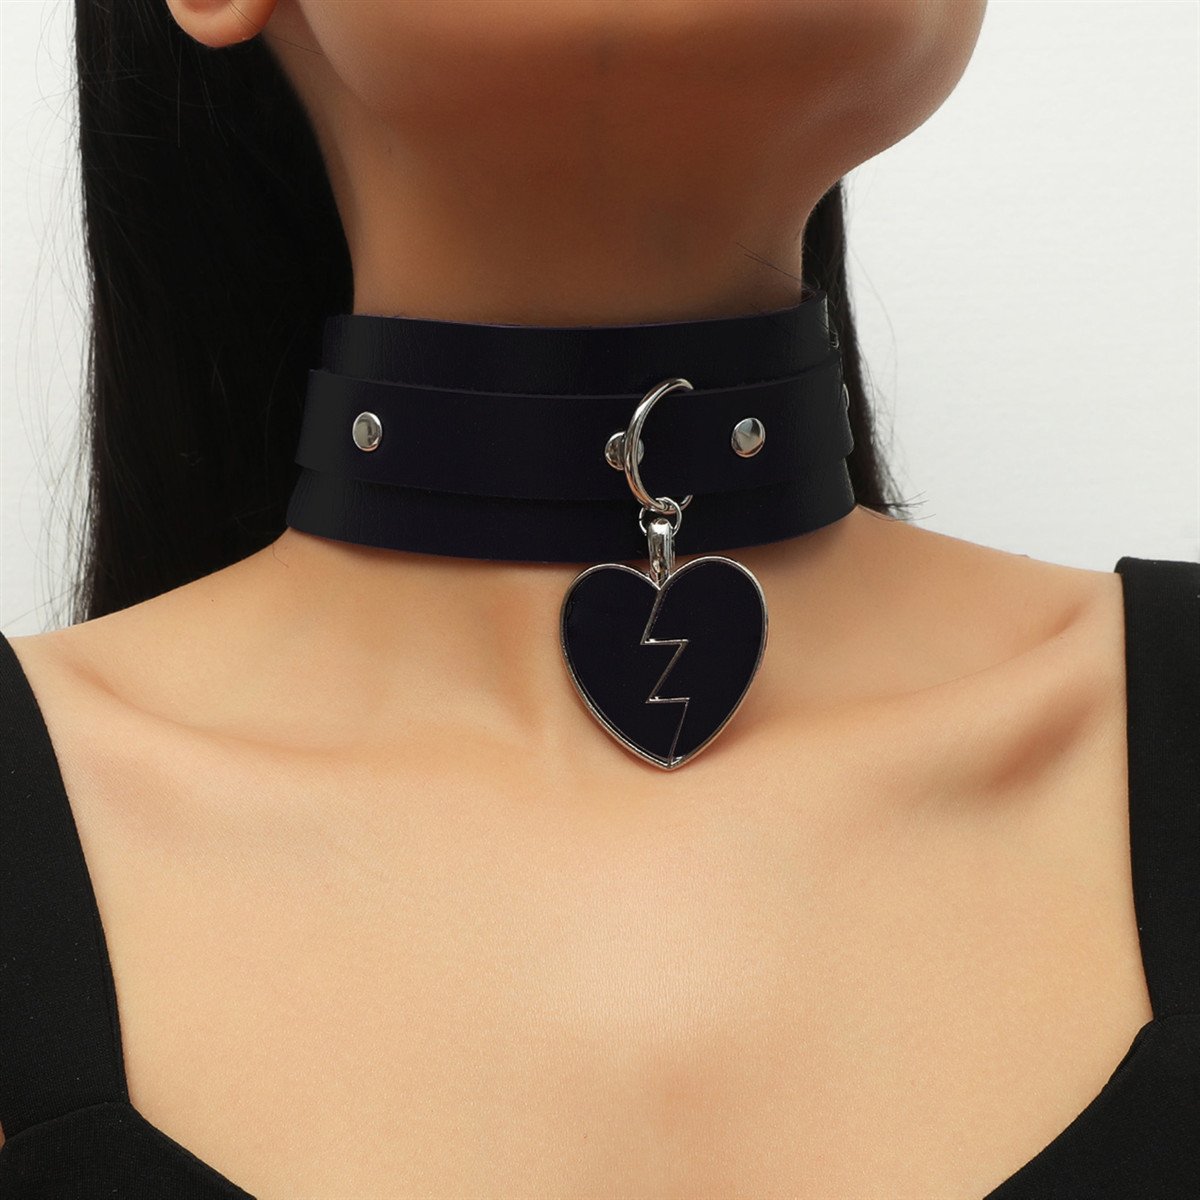 Sweetheart Design PU Leather Clavicle Chain-Necklaces-JEWELRYSHEOWN